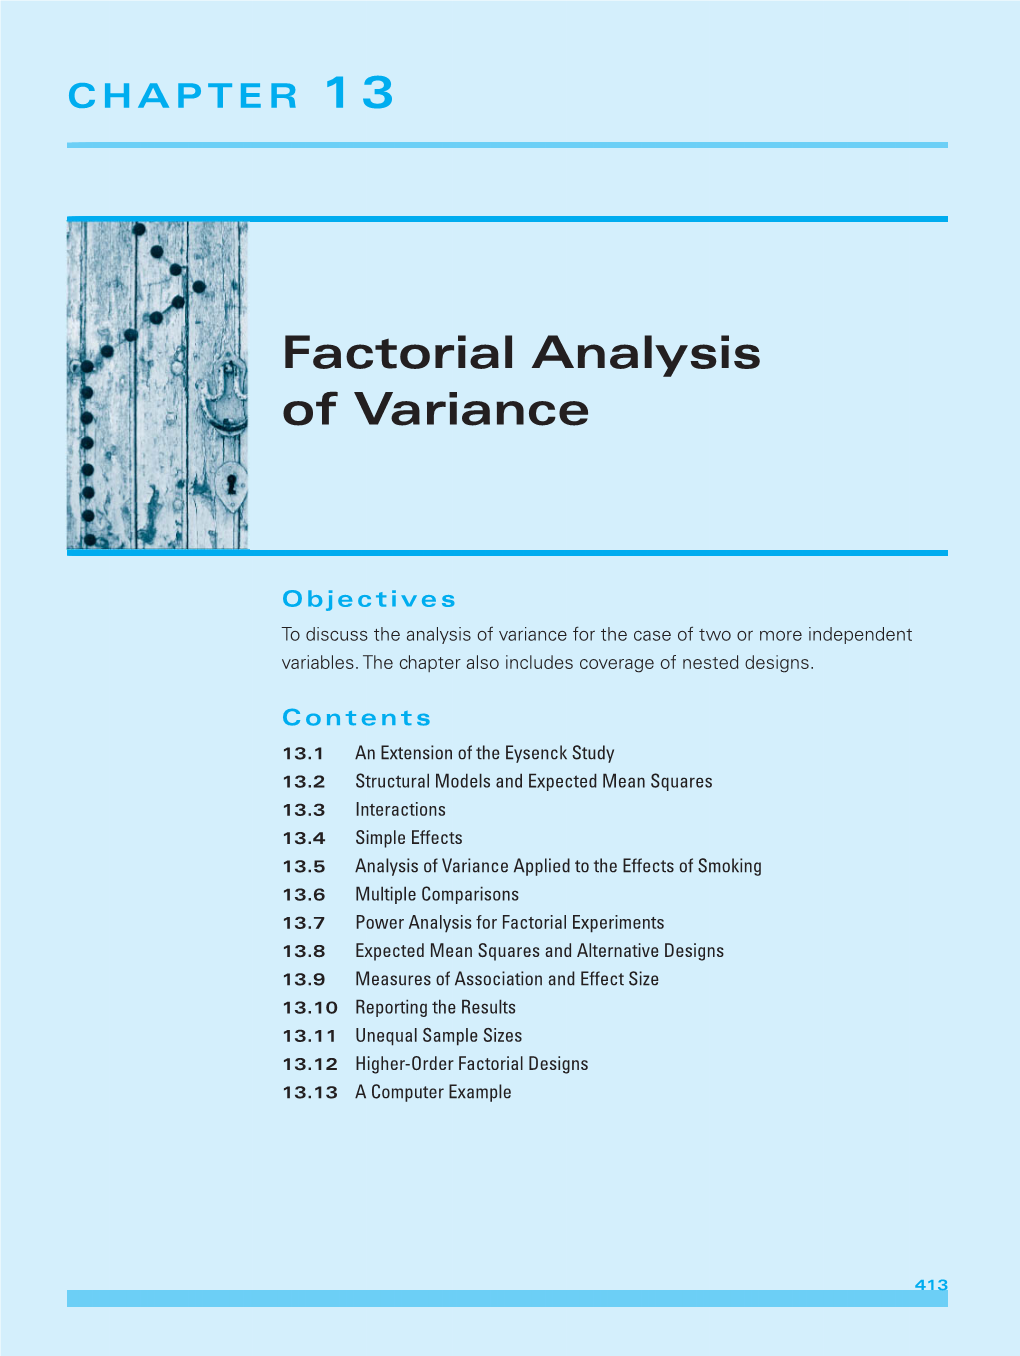 Factorial Analysis of Variance